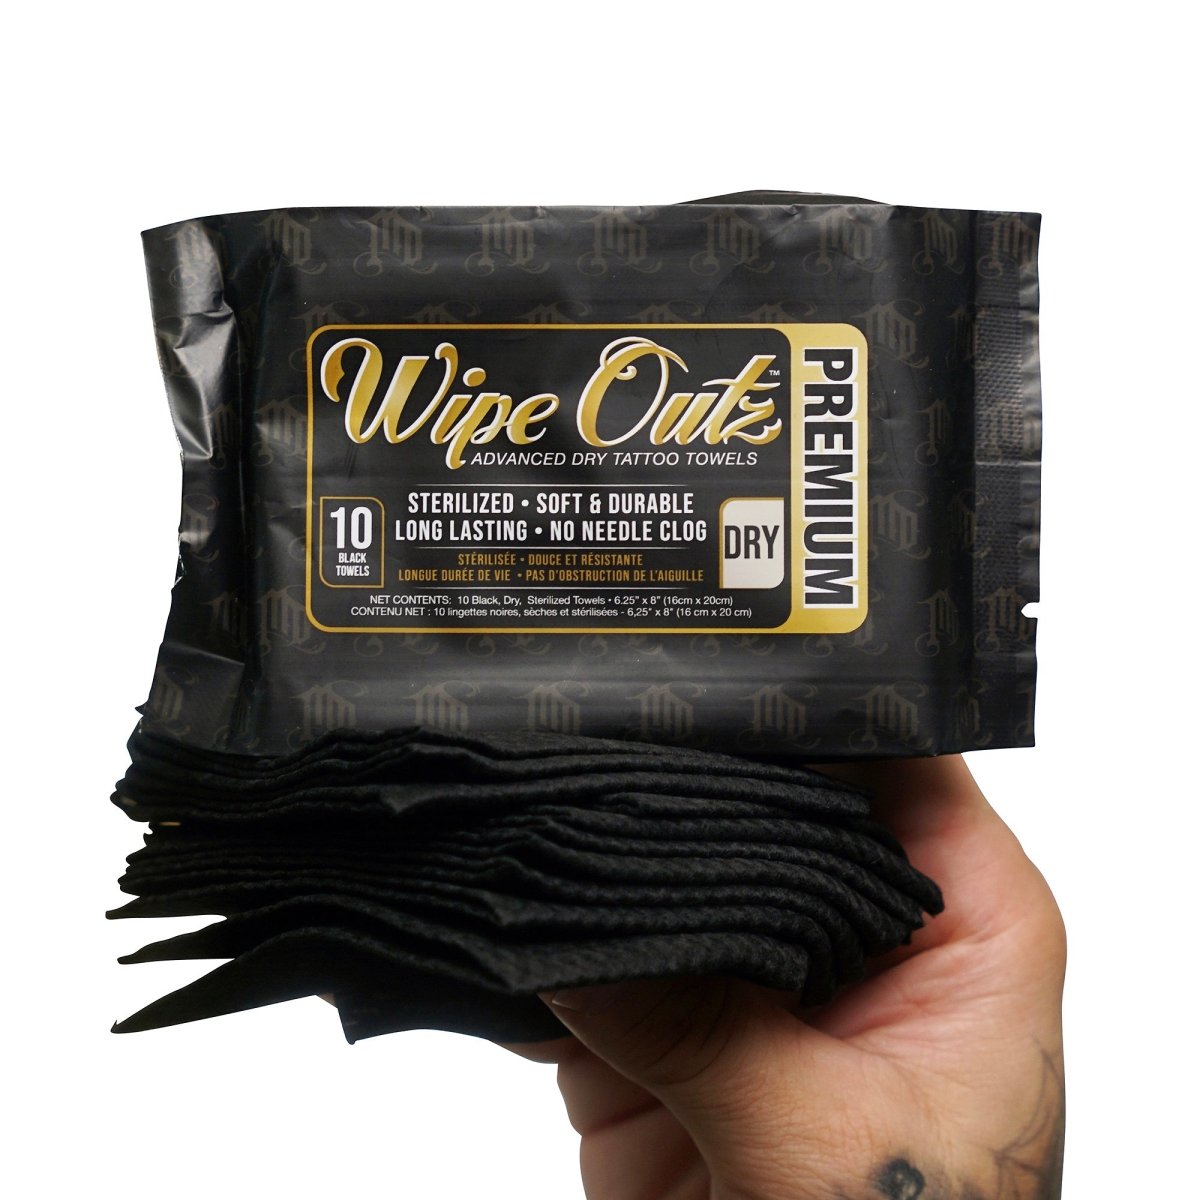 Wipe Outz Premium Dry Tattoo Towels (Black 10 Count) - MD Wipe Outz